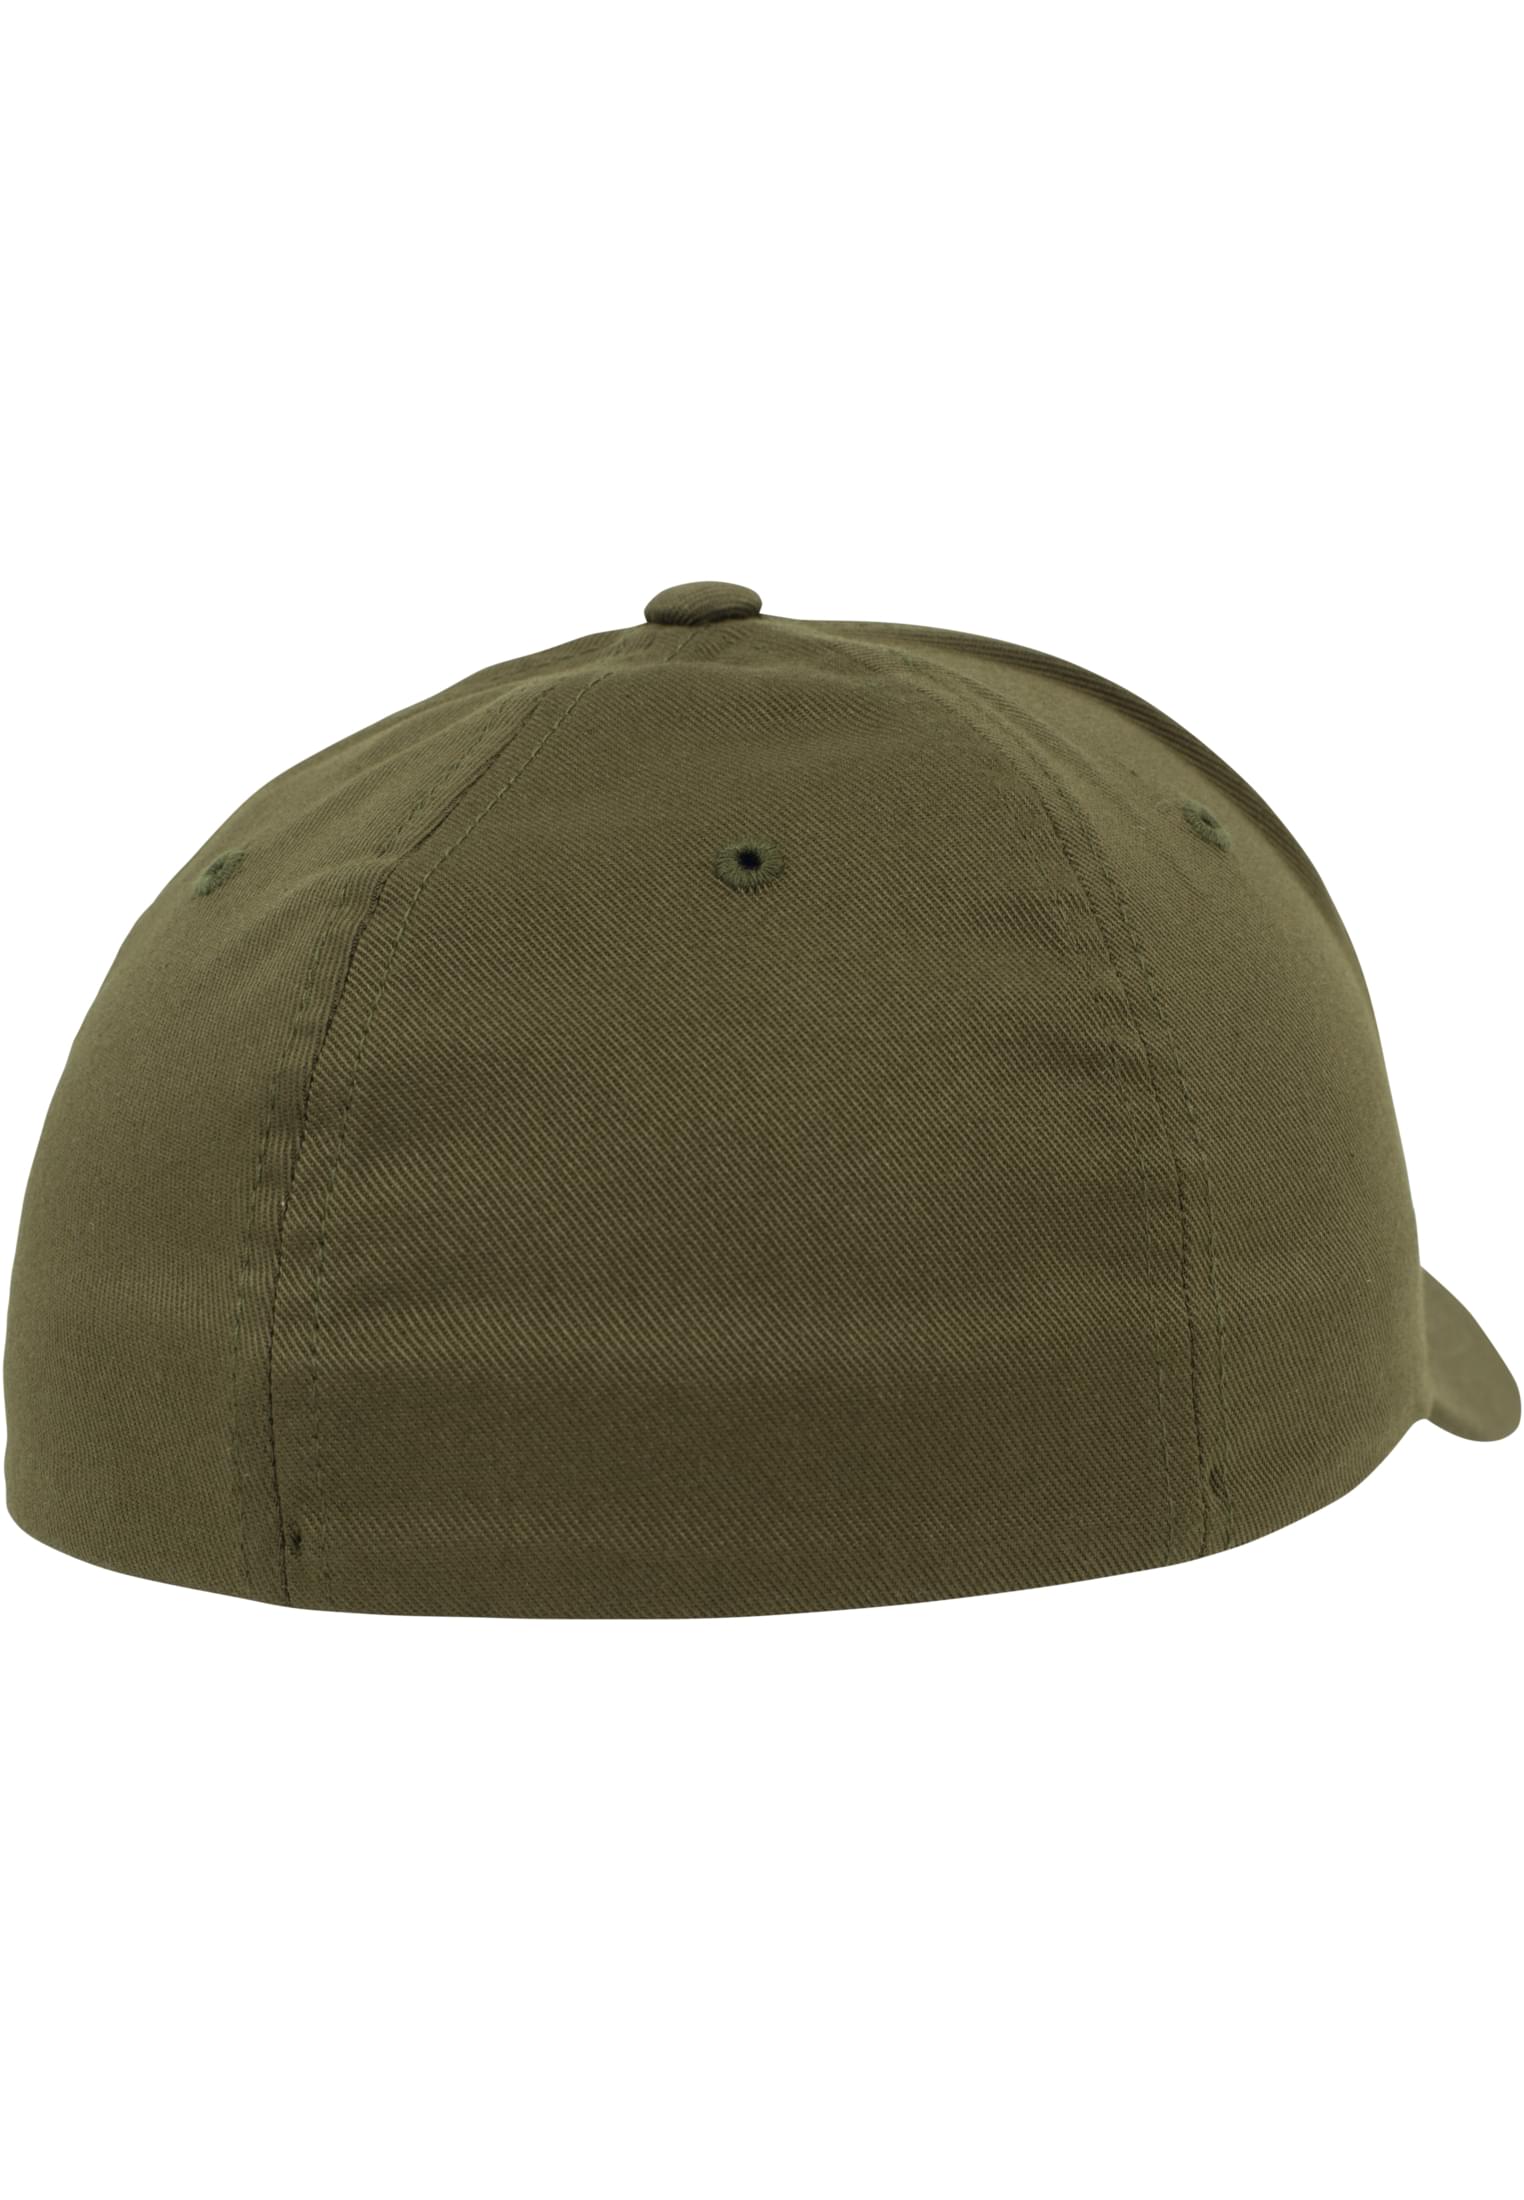  Fitted Baseball Cap in Farbe buck